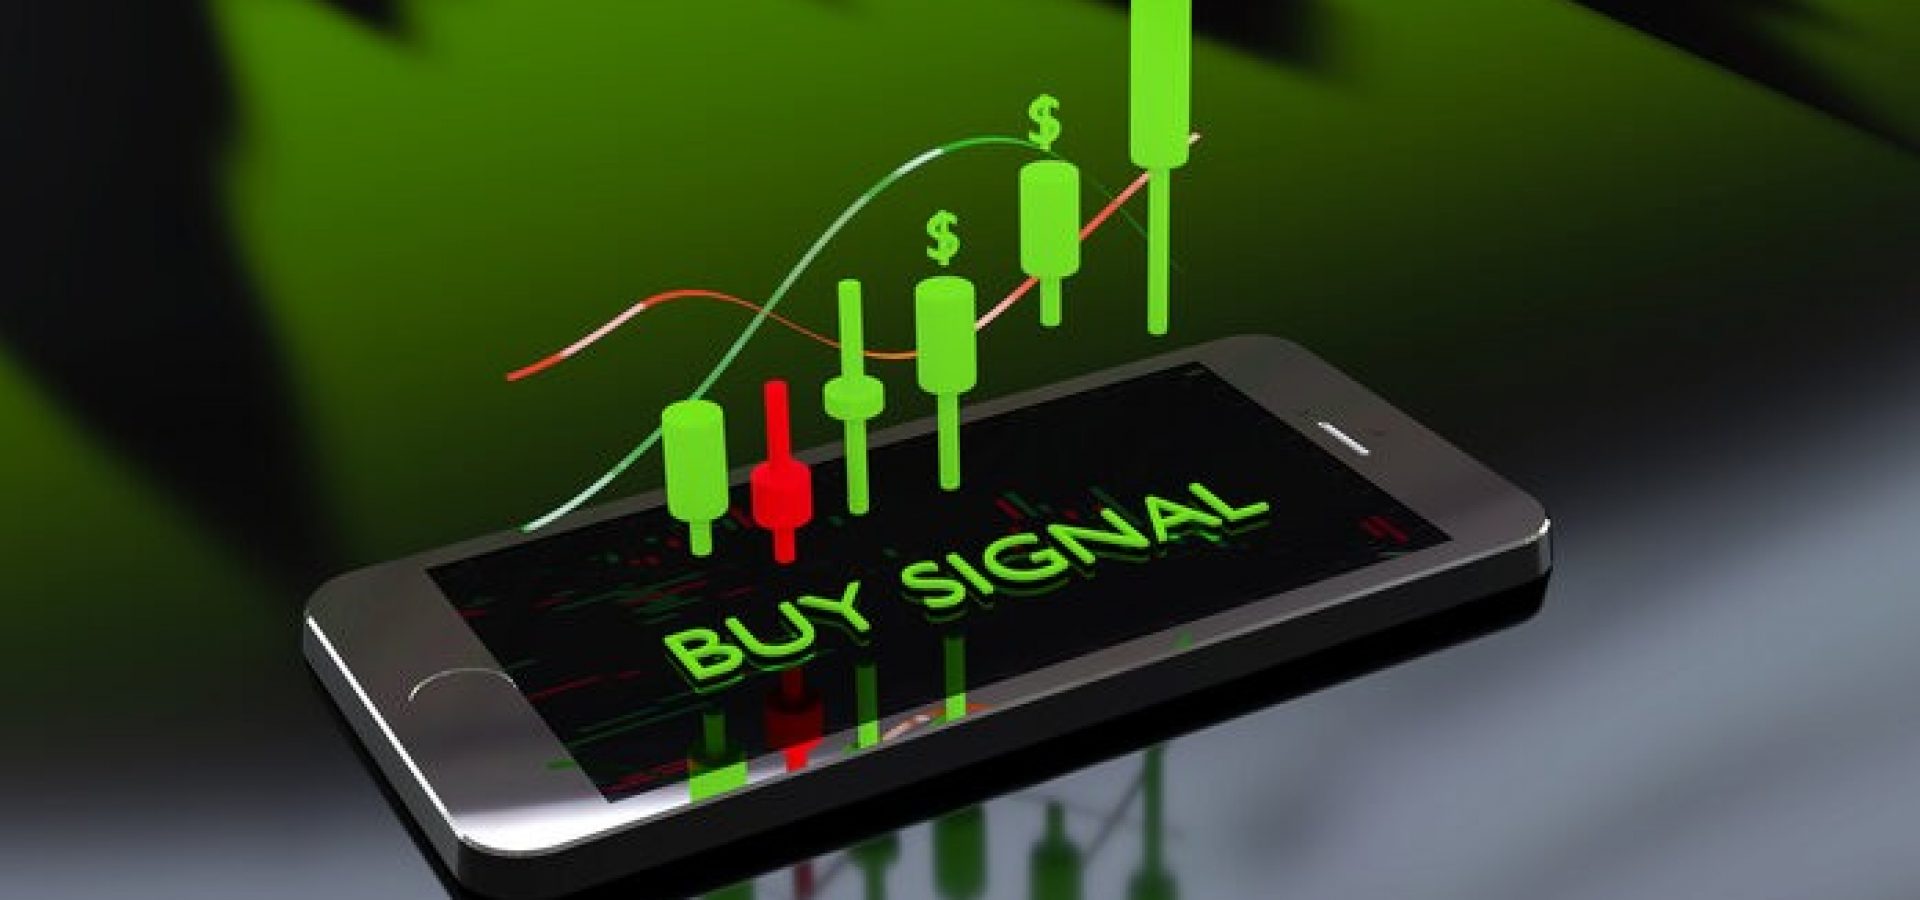 A trading signal